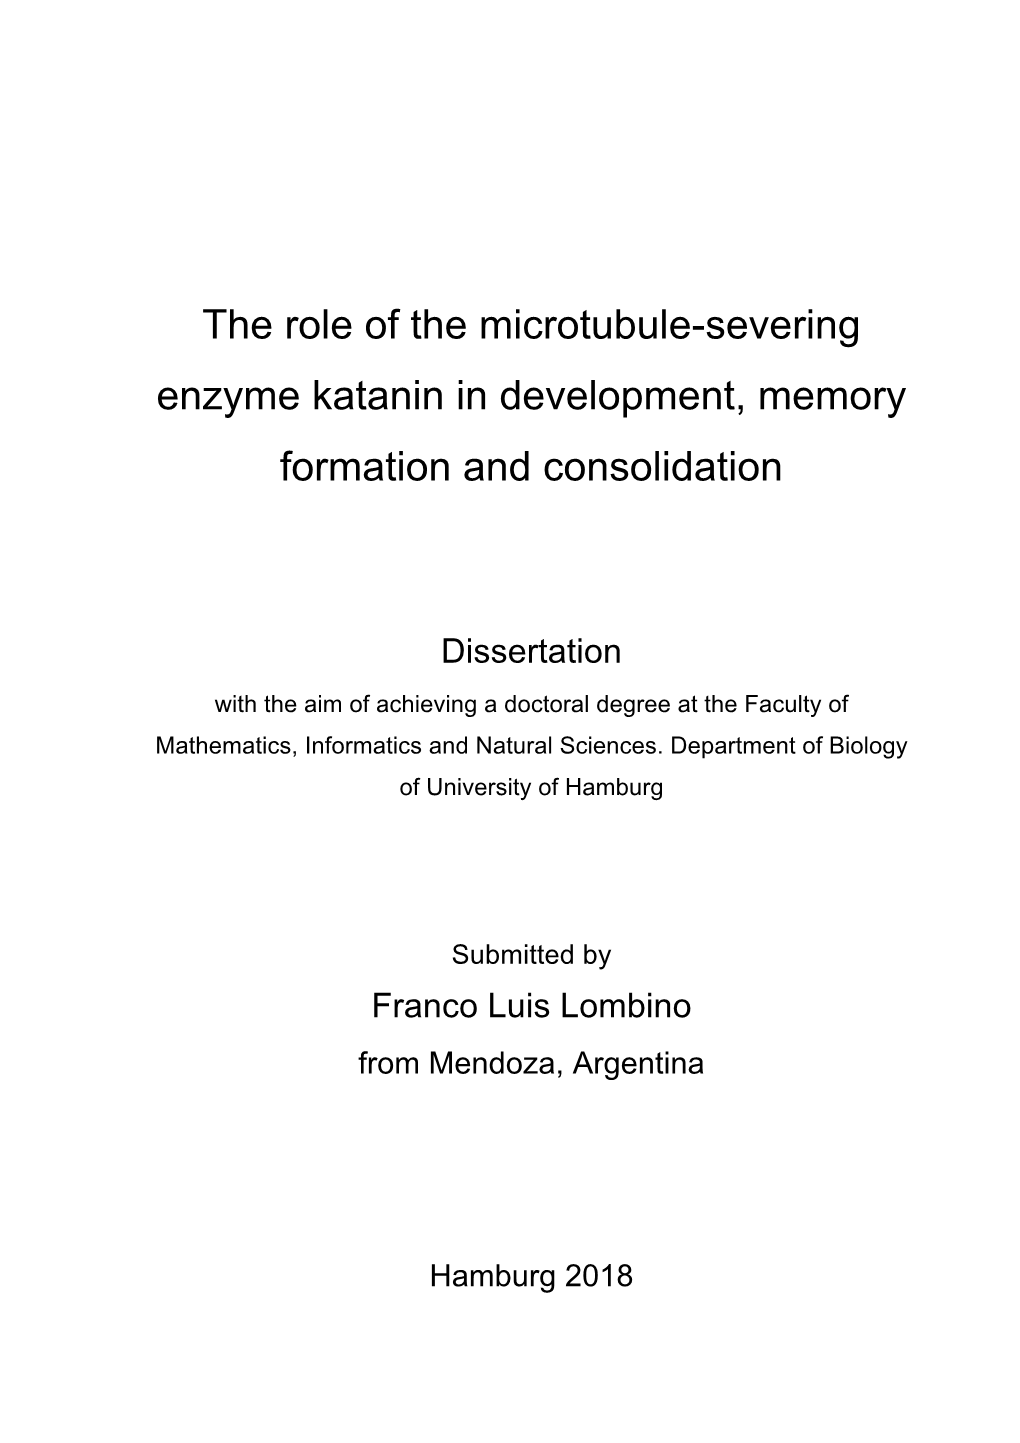 The Role of the Microtubule-Severing Enzyme Katanin in Development, Memory Formation and Consolidation